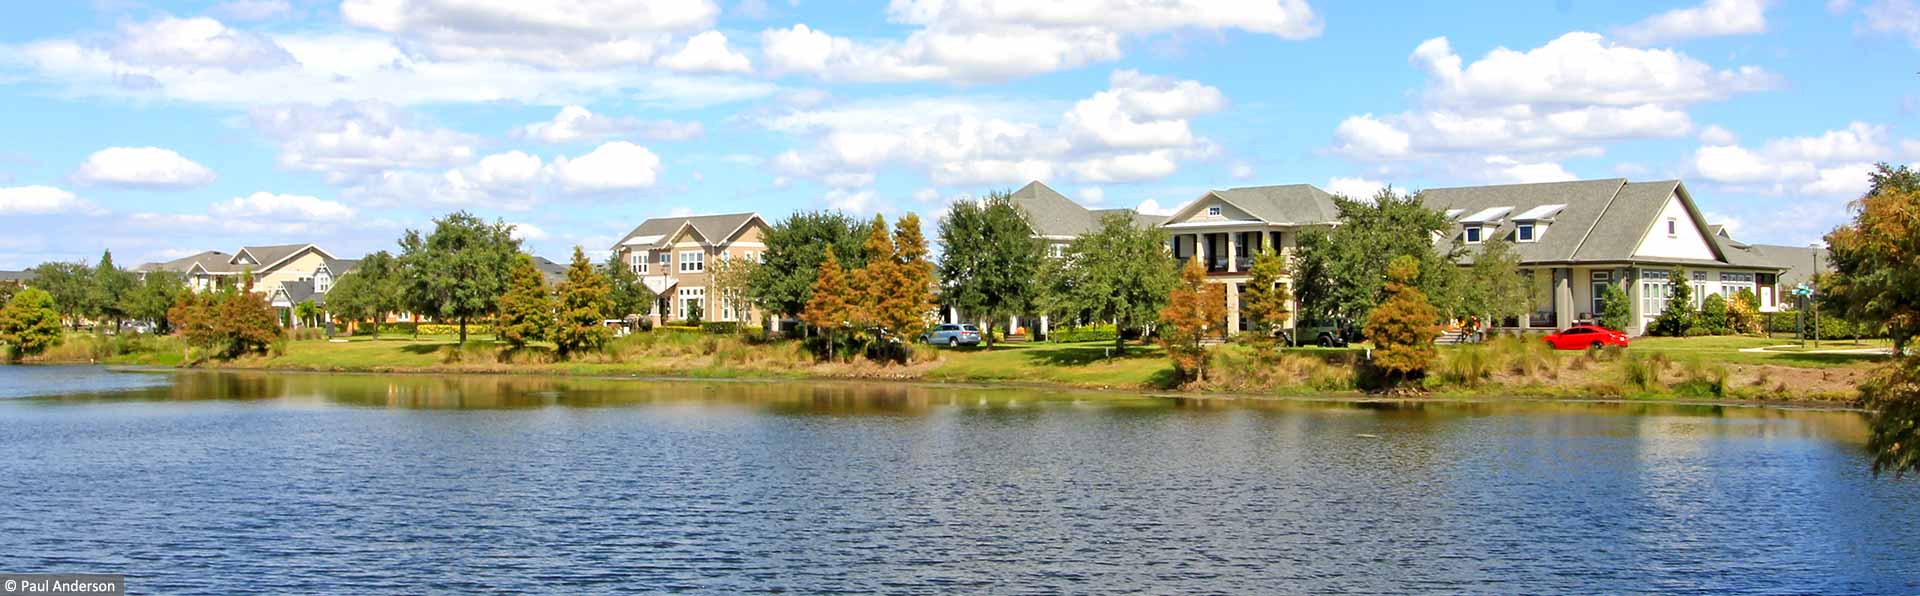 large homes overlooking a big lake